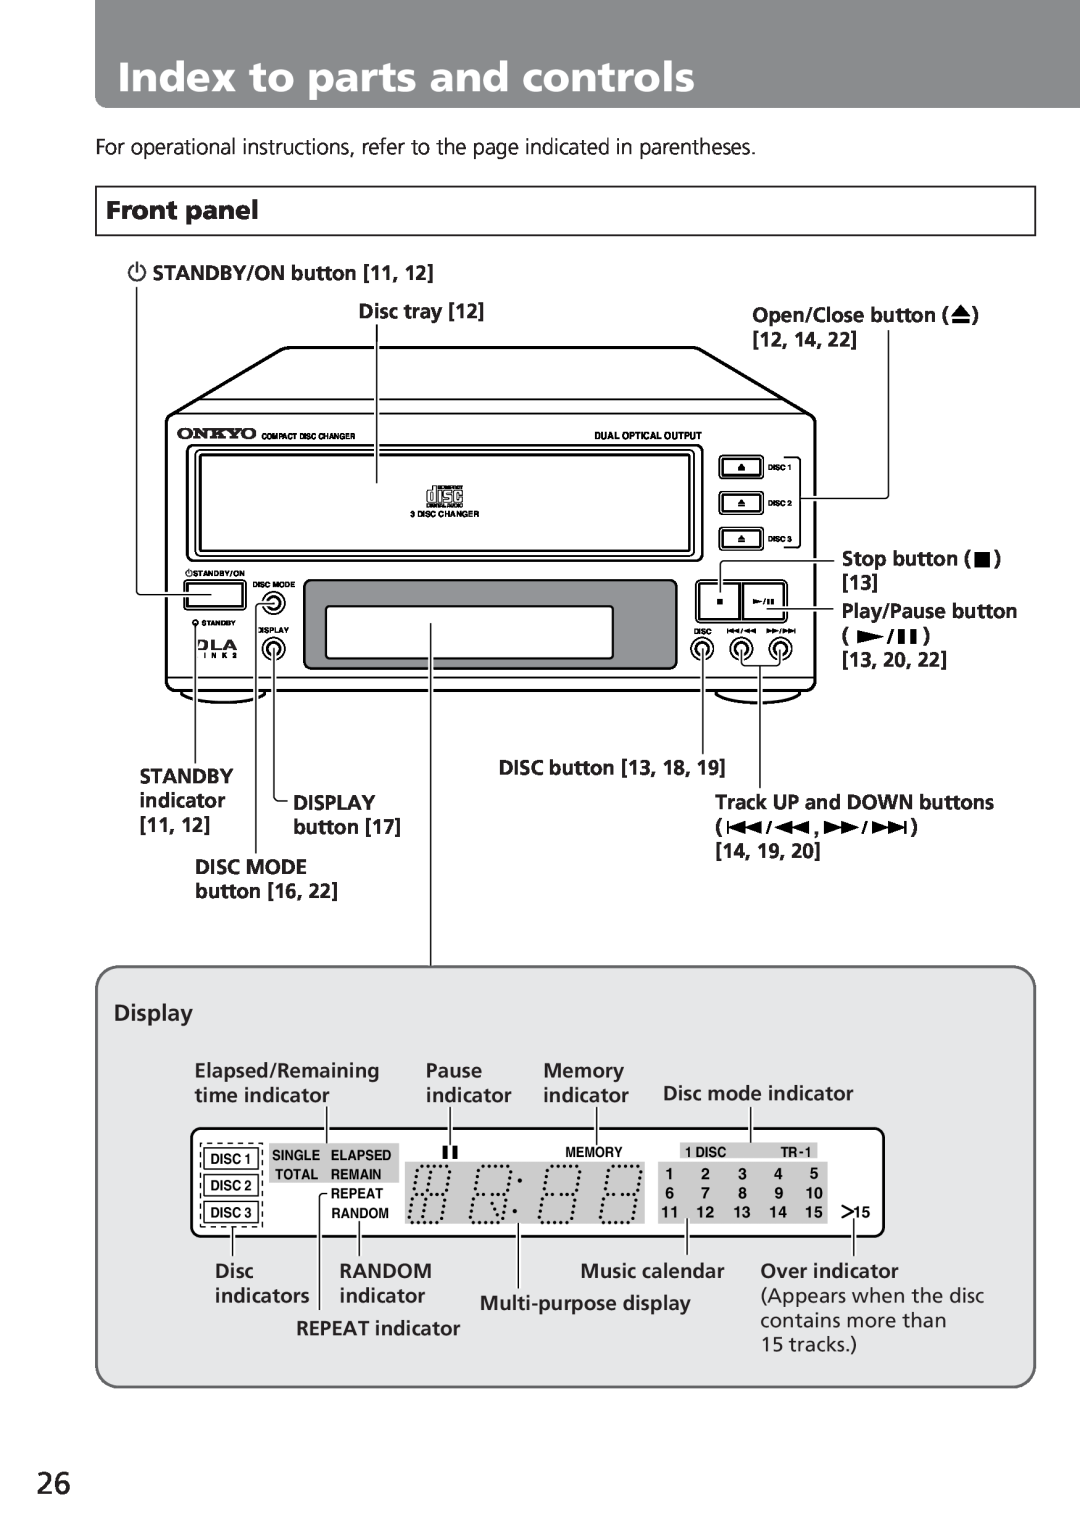 Onkyo C-707CHX instruction manual Index to parts and controls, Front panel 